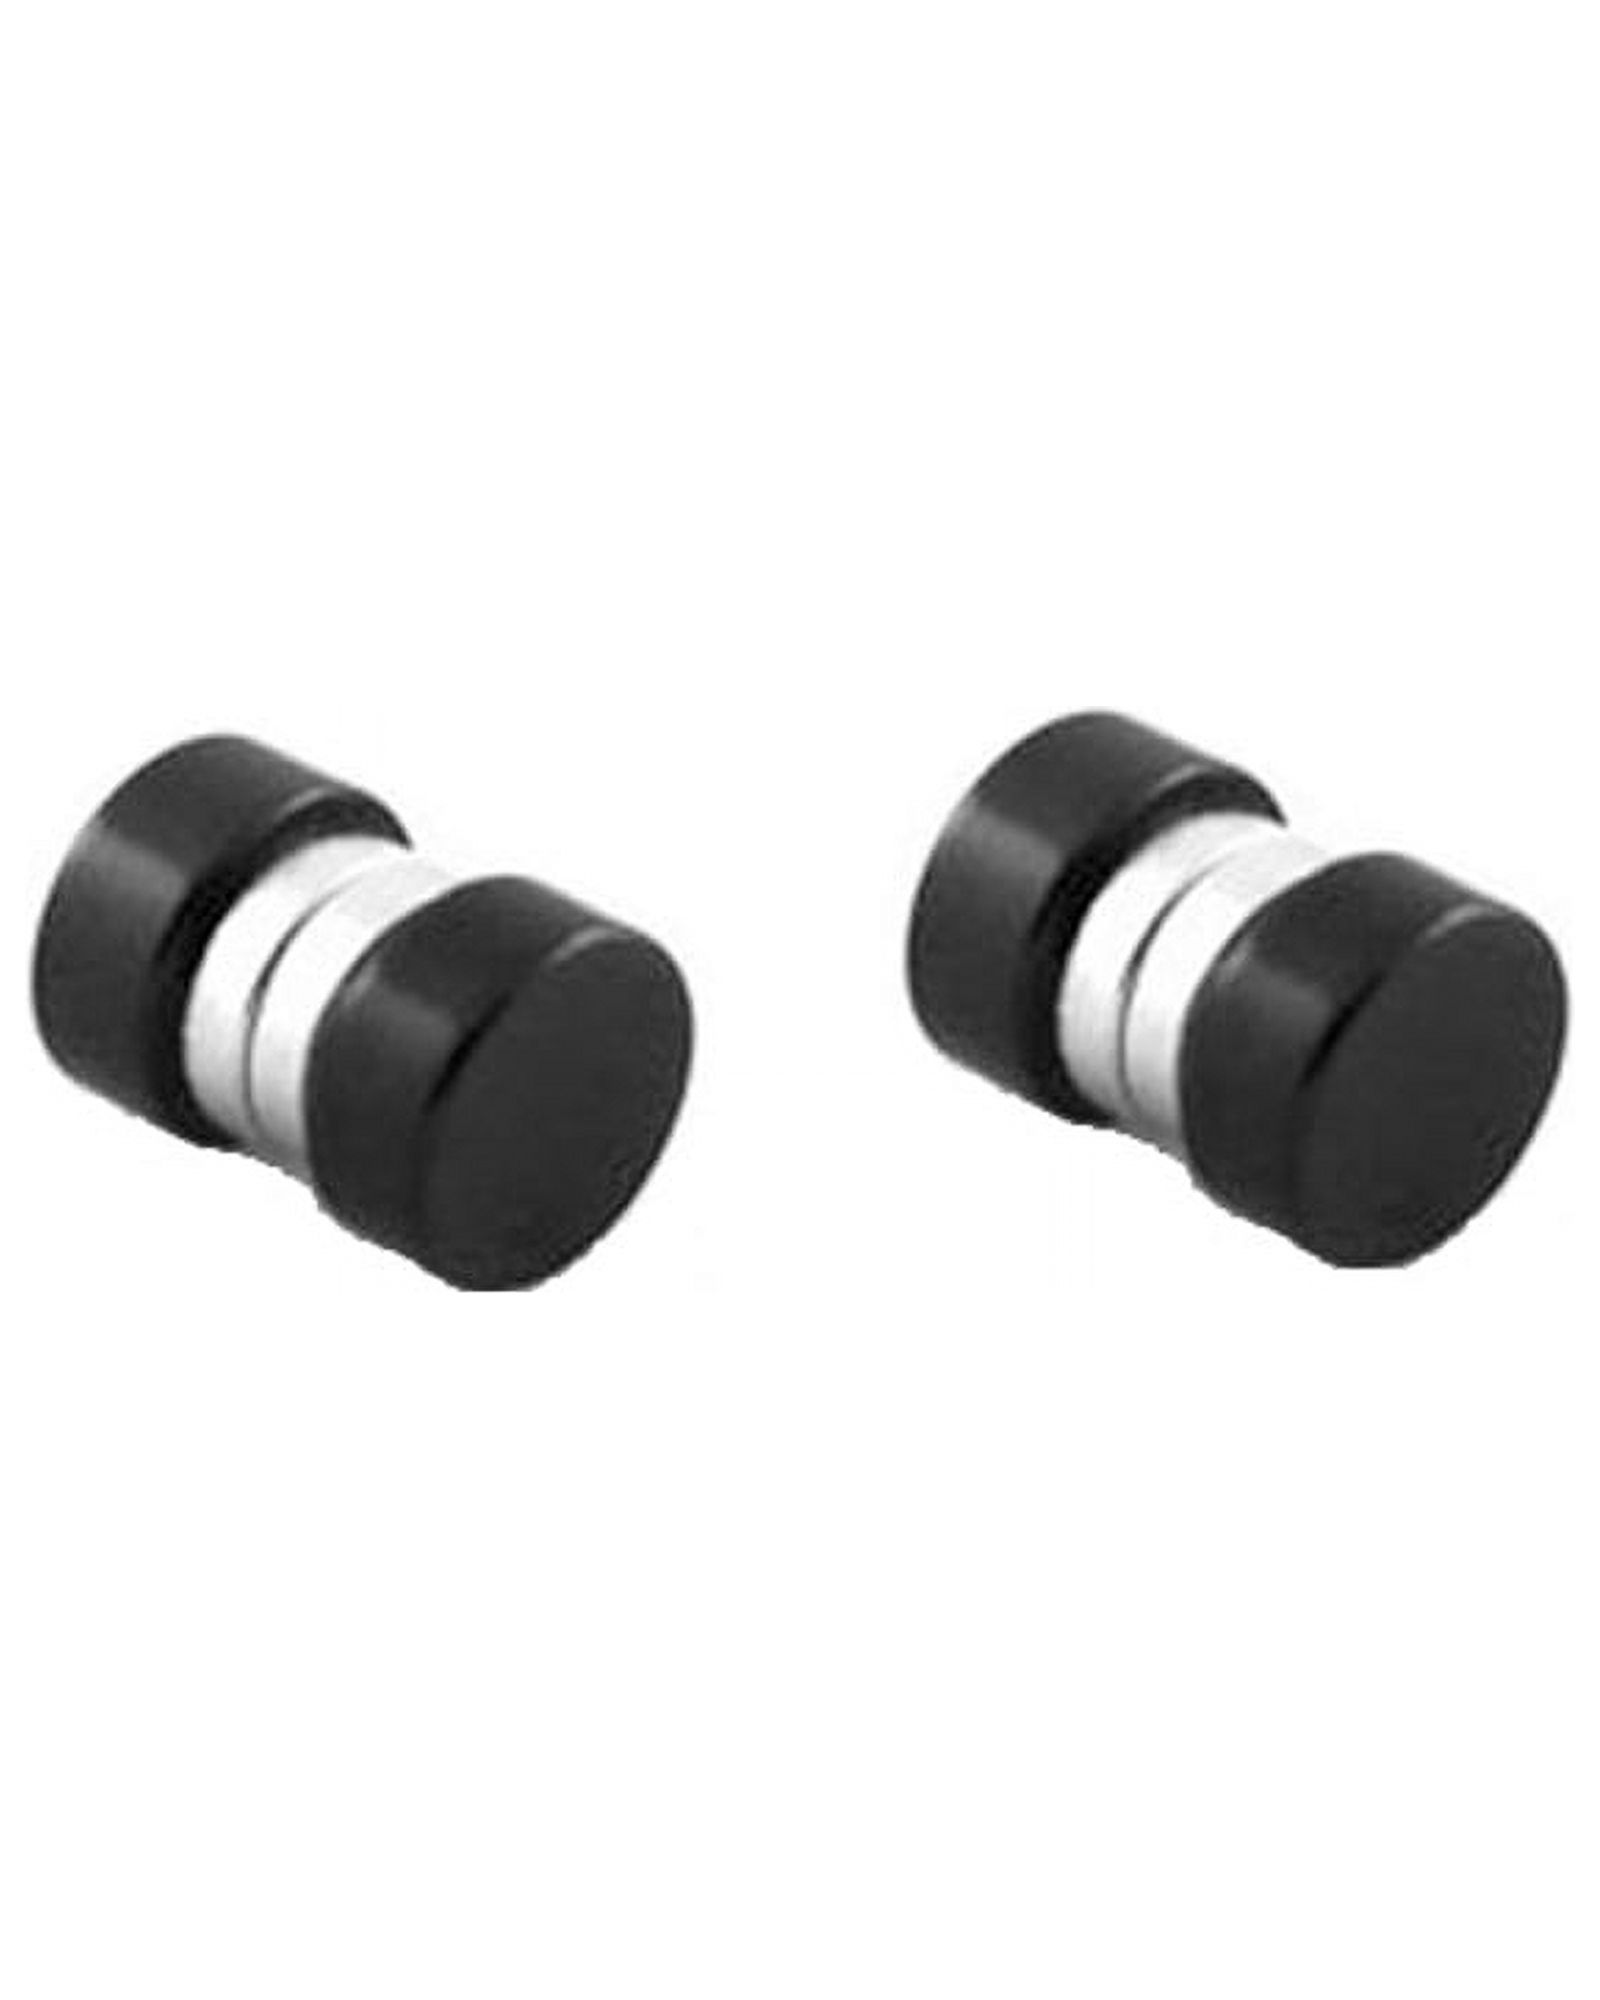 iJewelry2 Black Illusion Flesh Tunnel Plug Magnetic Stainless Steel Earrings 6mm - image 1 of 1